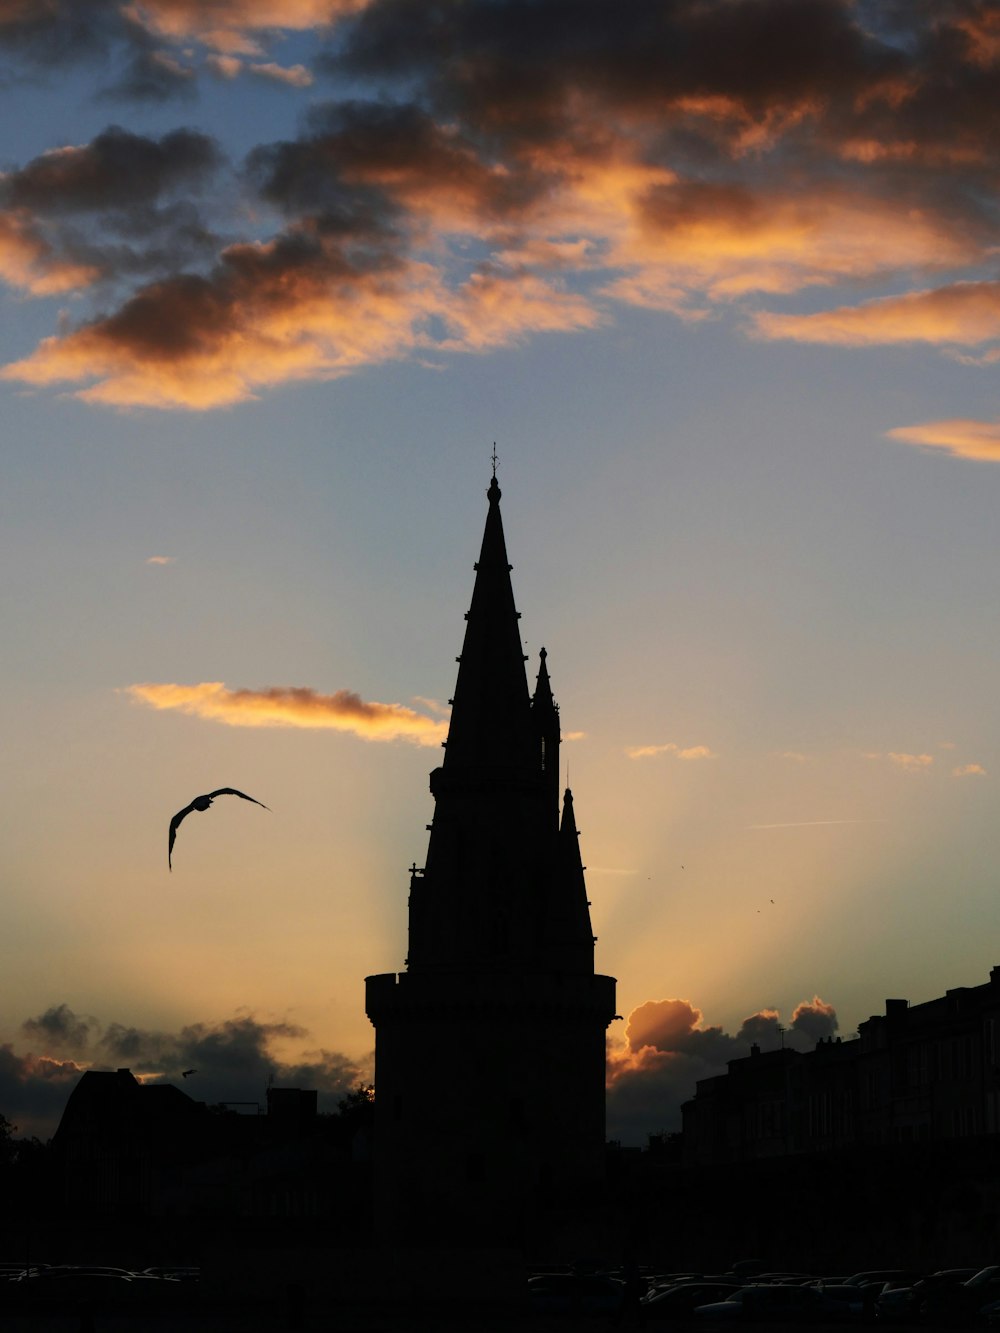 a church steeple with a bird flying in front of it